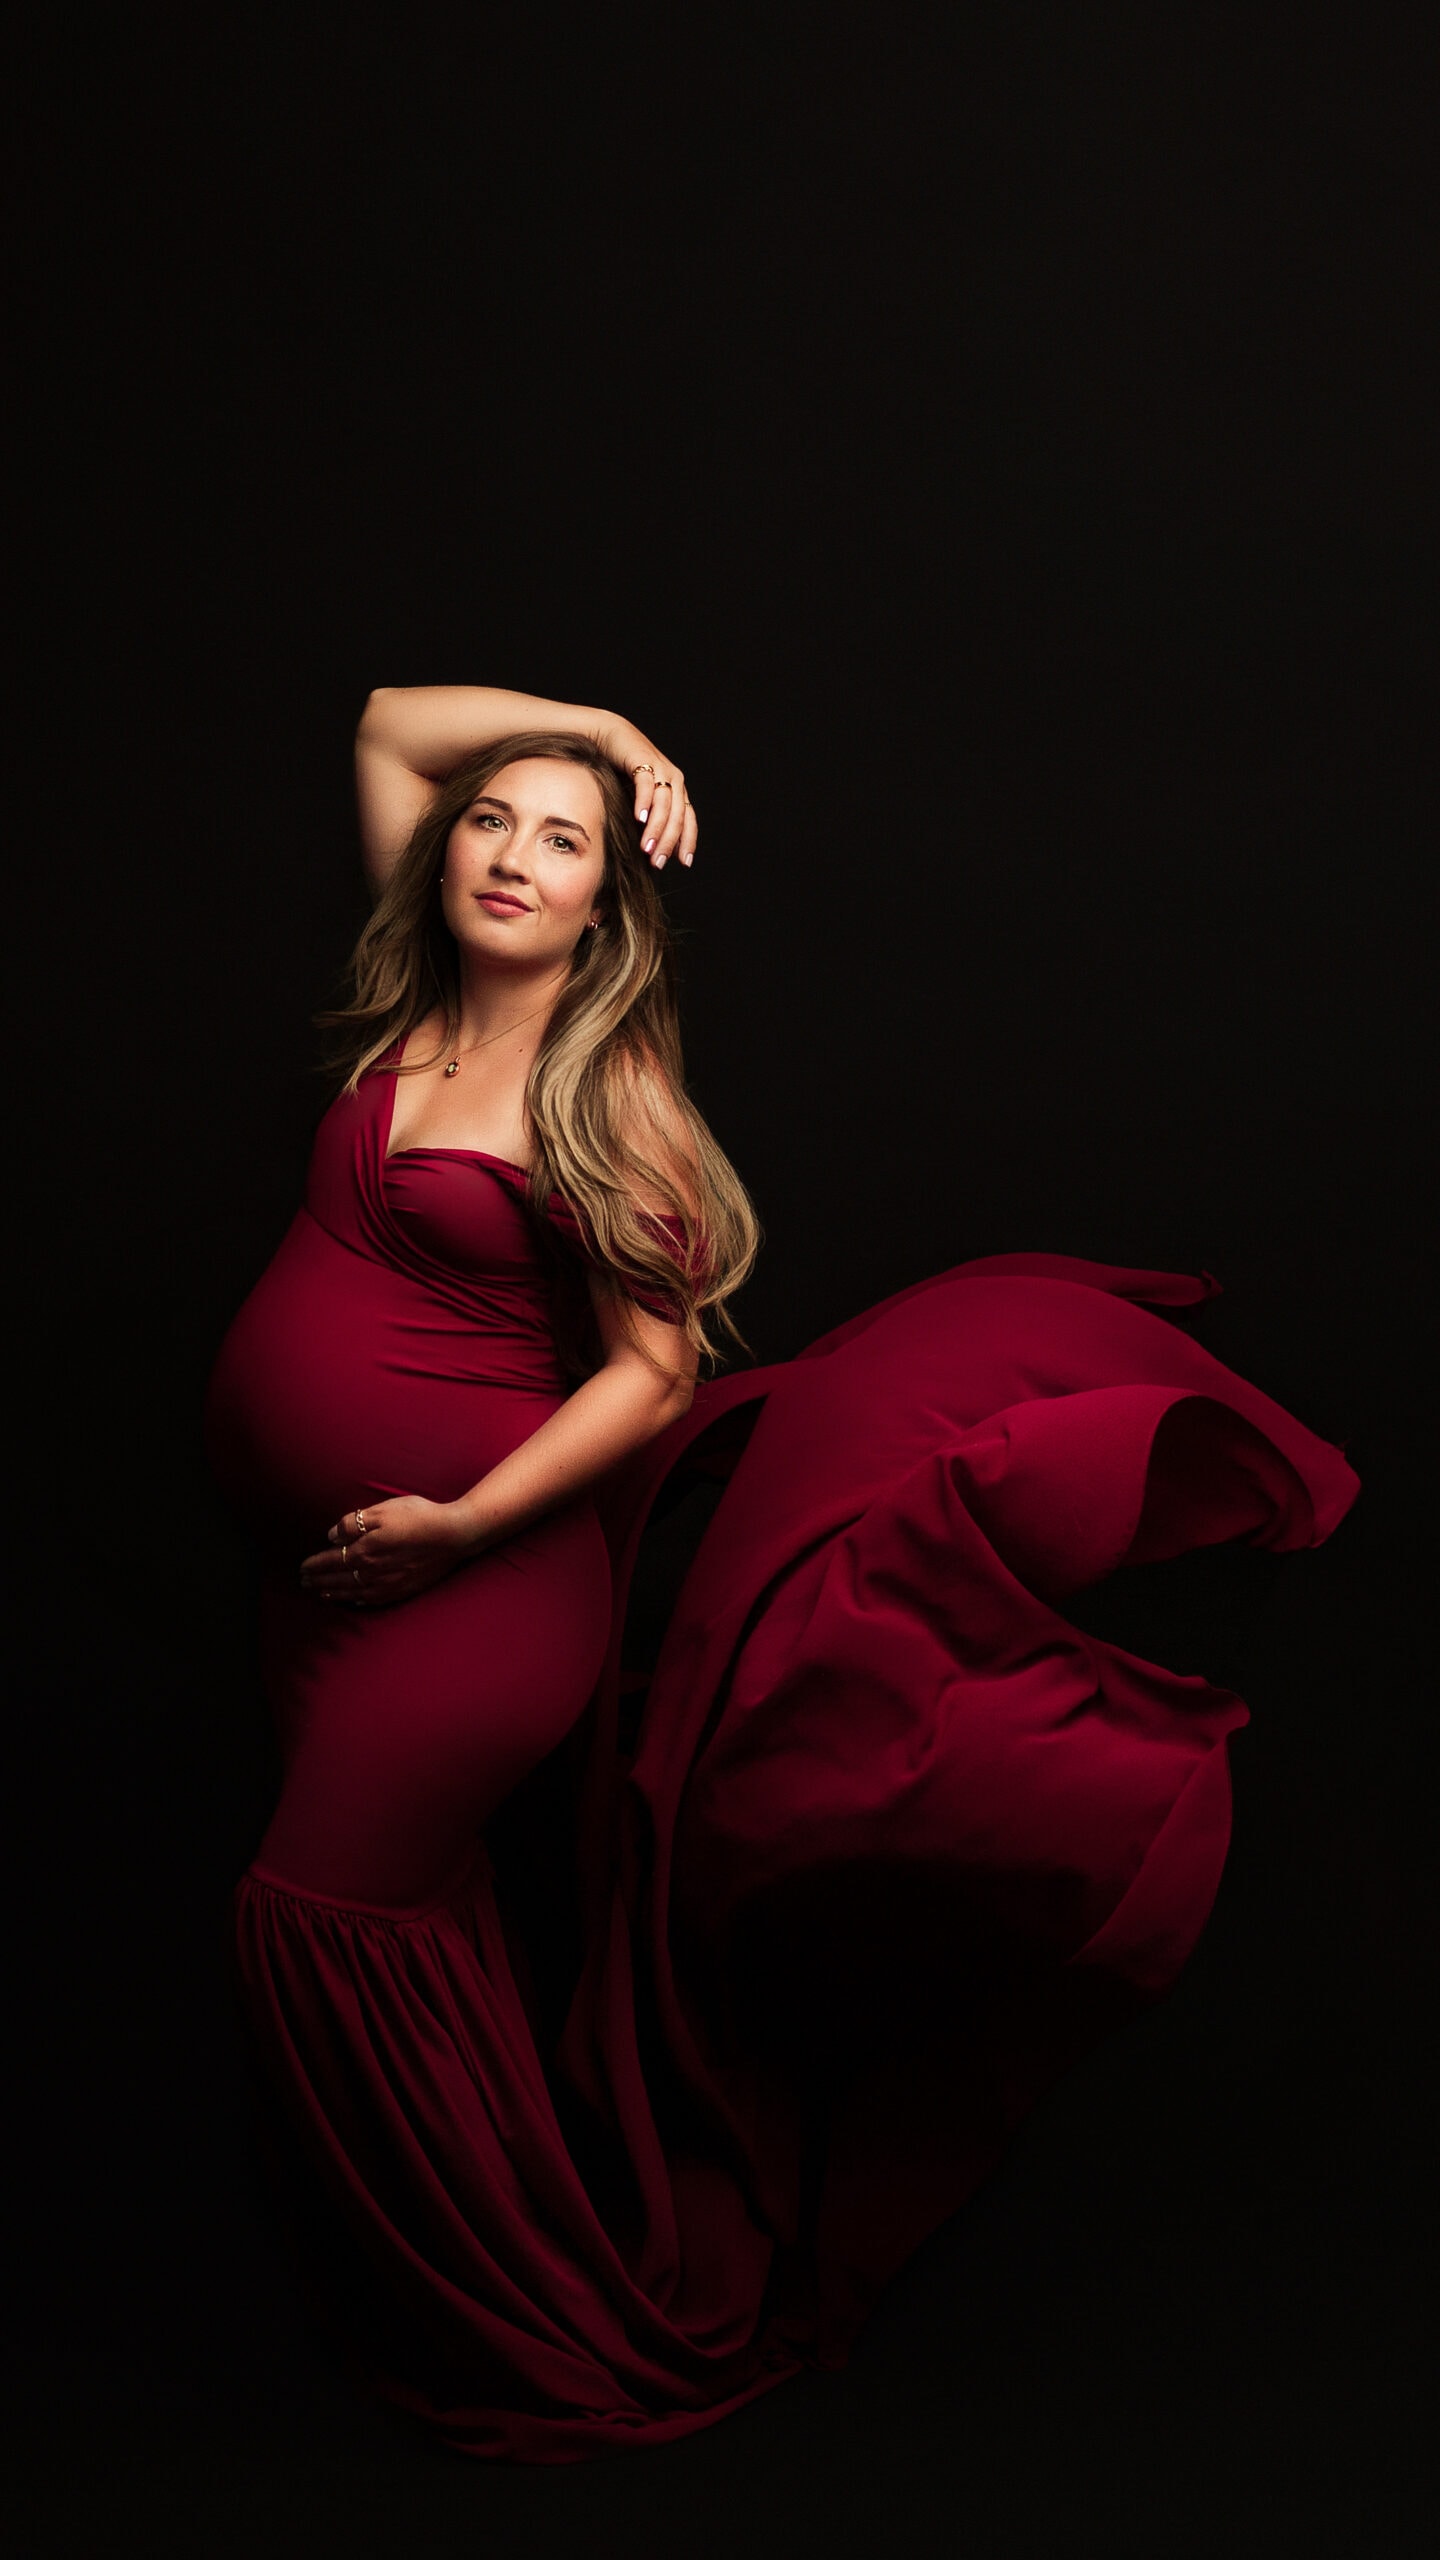 Maternity photograph in Southern Oregon wearing red dress.